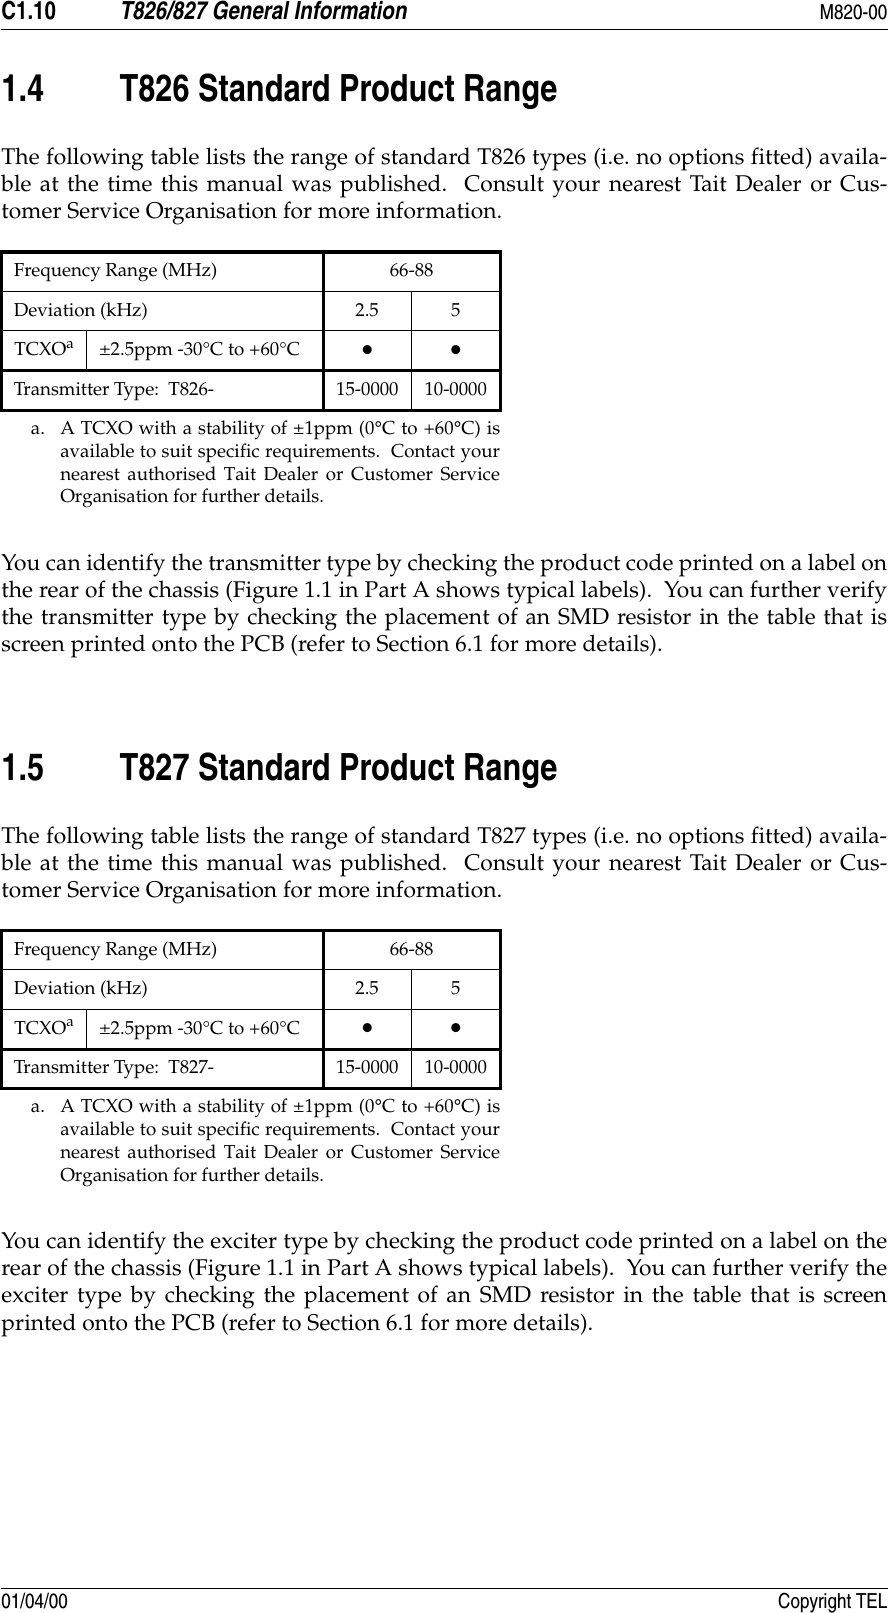 C1.10 T826/827 General Information M820-0001/04/00 Copyright TEL1.4 T826 Standard Product RangeThe following table lists the range of standard T826 types (i.e. no options fitted) availa-ble at the time this manual was published.  Consult your nearest Tait Dealer or Cus-tomer Service Organisation for more information.You can identify the transmitter type by checking the product code printed on a label onthe rear of the chassis (Figure 1.1 in Part A shows typical labels).  You can further verifythe transmitter type by checking the placement of an SMD resistor in the table that isscreen printed onto the PCB (refer to Section 6.1 for more details).  1.5 T827 Standard Product RangeThe following table lists the range of standard T827 types (i.e. no options fitted) availa-ble at the time this manual was published.  Consult your nearest Tait Dealer or Cus-tomer Service Organisation for more information.You can identify the exciter type by checking the product code printed on a label on therear of the chassis (Figure 1.1 in Part A shows typical labels).  You can further verify theexciter type by checking the placement of an SMD resistor in the table that is screenprinted onto the PCB (refer to Section 6.1 for more details).  Frequency Range (MHz) 66-88Deviation (kHz) 2.5 5TCXOaa. A TCXO with a stability of ±1ppm (0°C to +60°C) isavailable to suit specific requirements.  Contact yournearest authorised Tait Dealer or Customer ServiceOrganisation for further details.±2.5ppm -30°C to +60°C ••Transmitter Type:  T826- 15-0000 10-0000Frequency Range (MHz) 66-88Deviation (kHz) 2.5 5TCXOaa. A TCXO with a stability of ±1ppm (0°C to +60°C) isavailable to suit specific requirements.  Contact yournearest authorised Tait Dealer or Customer ServiceOrganisation for further details.±2.5ppm -30°C to +60°C ••Transmitter Type:  T827- 15-0000 10-0000